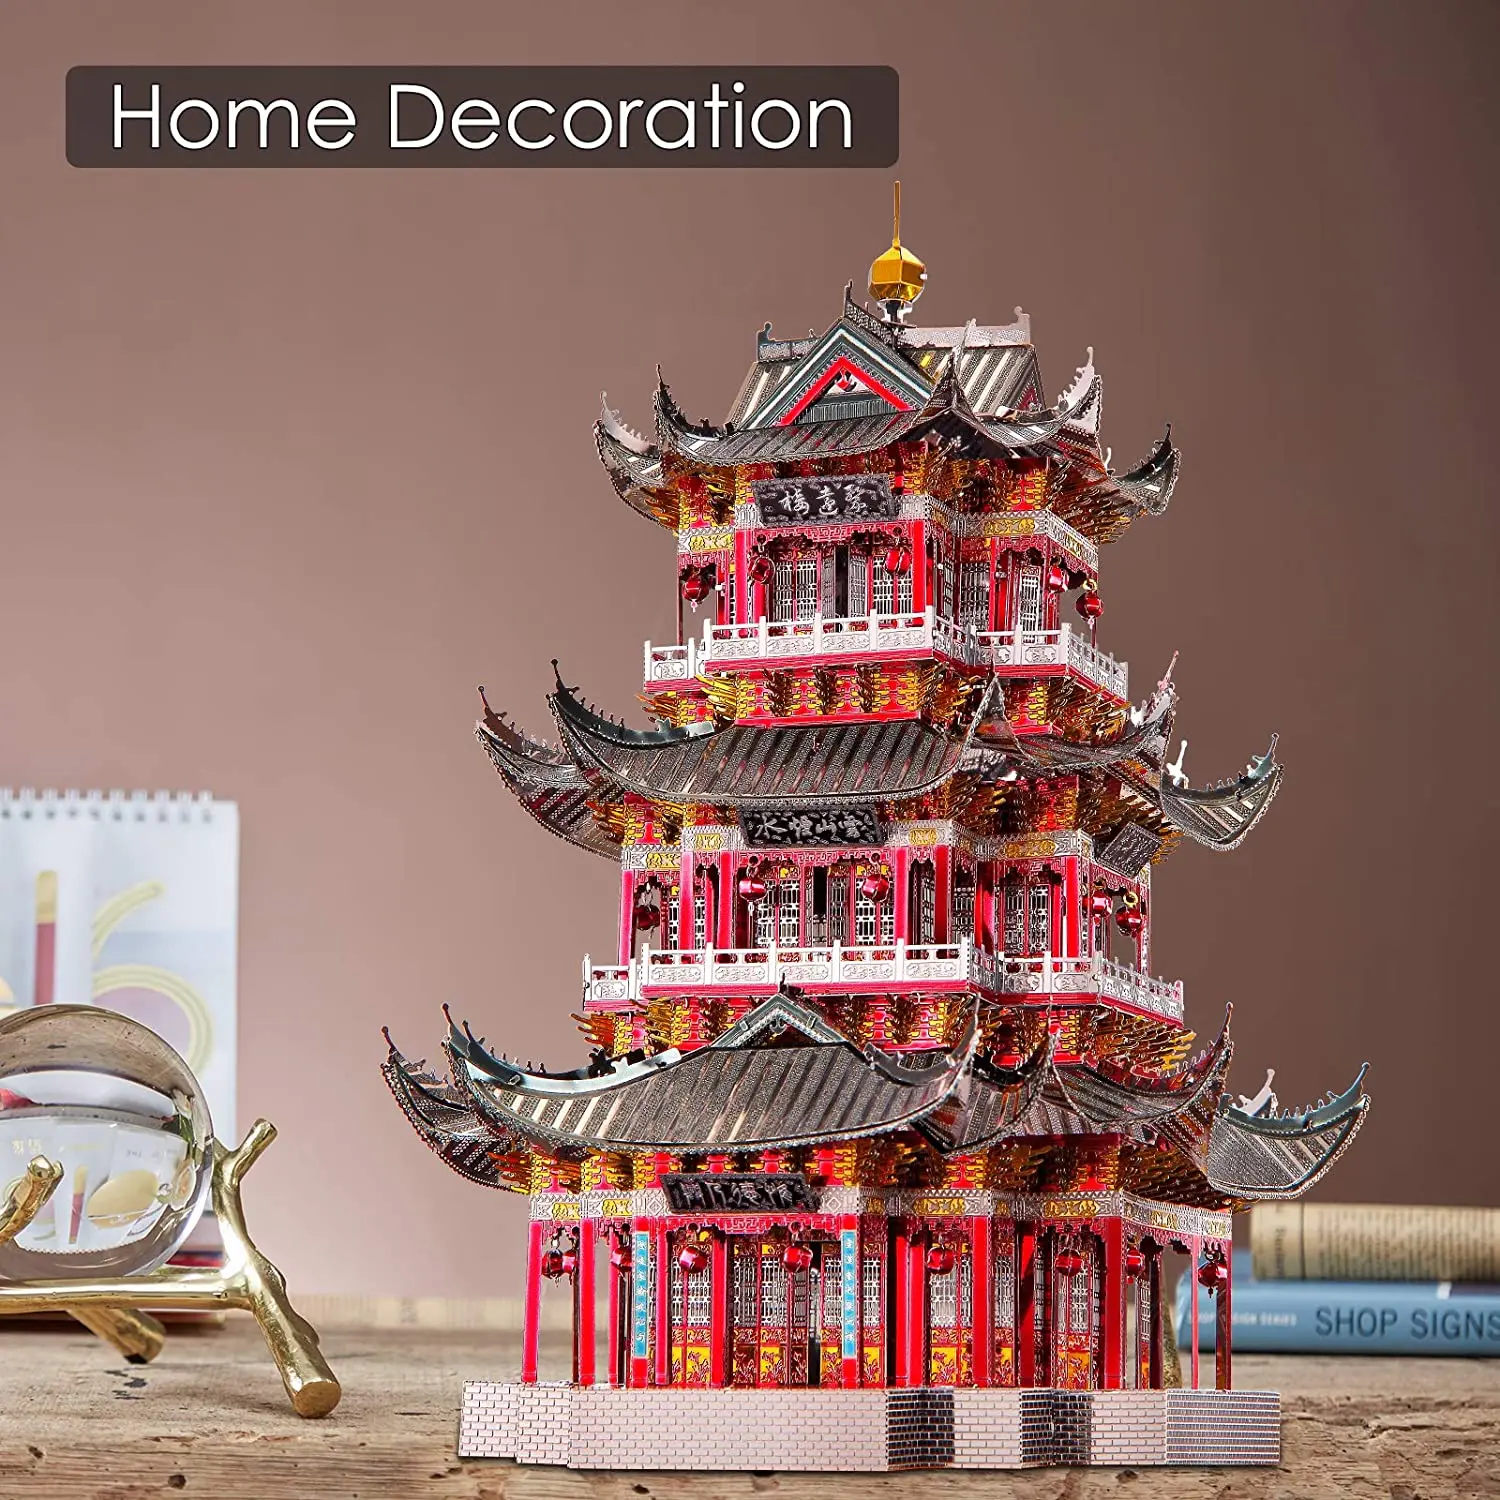 Piececool 3D Metal Puzzles, The Pawn Shop Chinese Traditional Architecture  Building Models Kit to Build for Adults Brain Teaser Puzzle Toys Gift Home